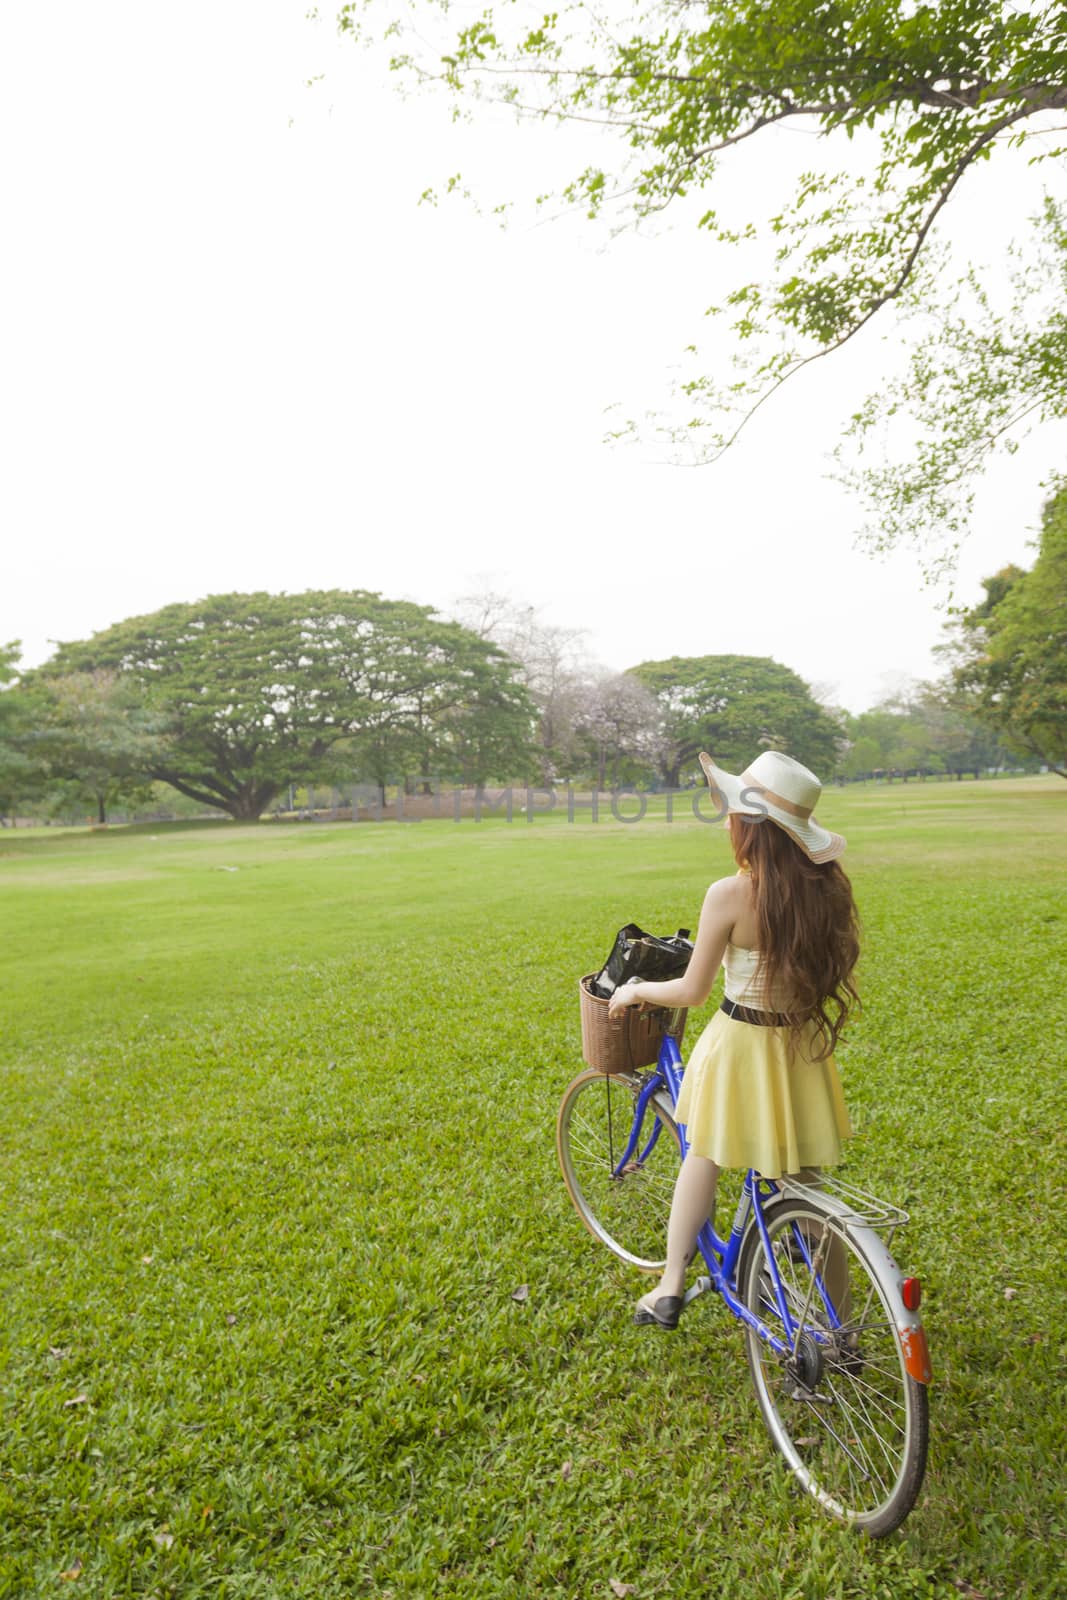 Woman riding a bicycle. Woman with hat riding a bicycle in the park.